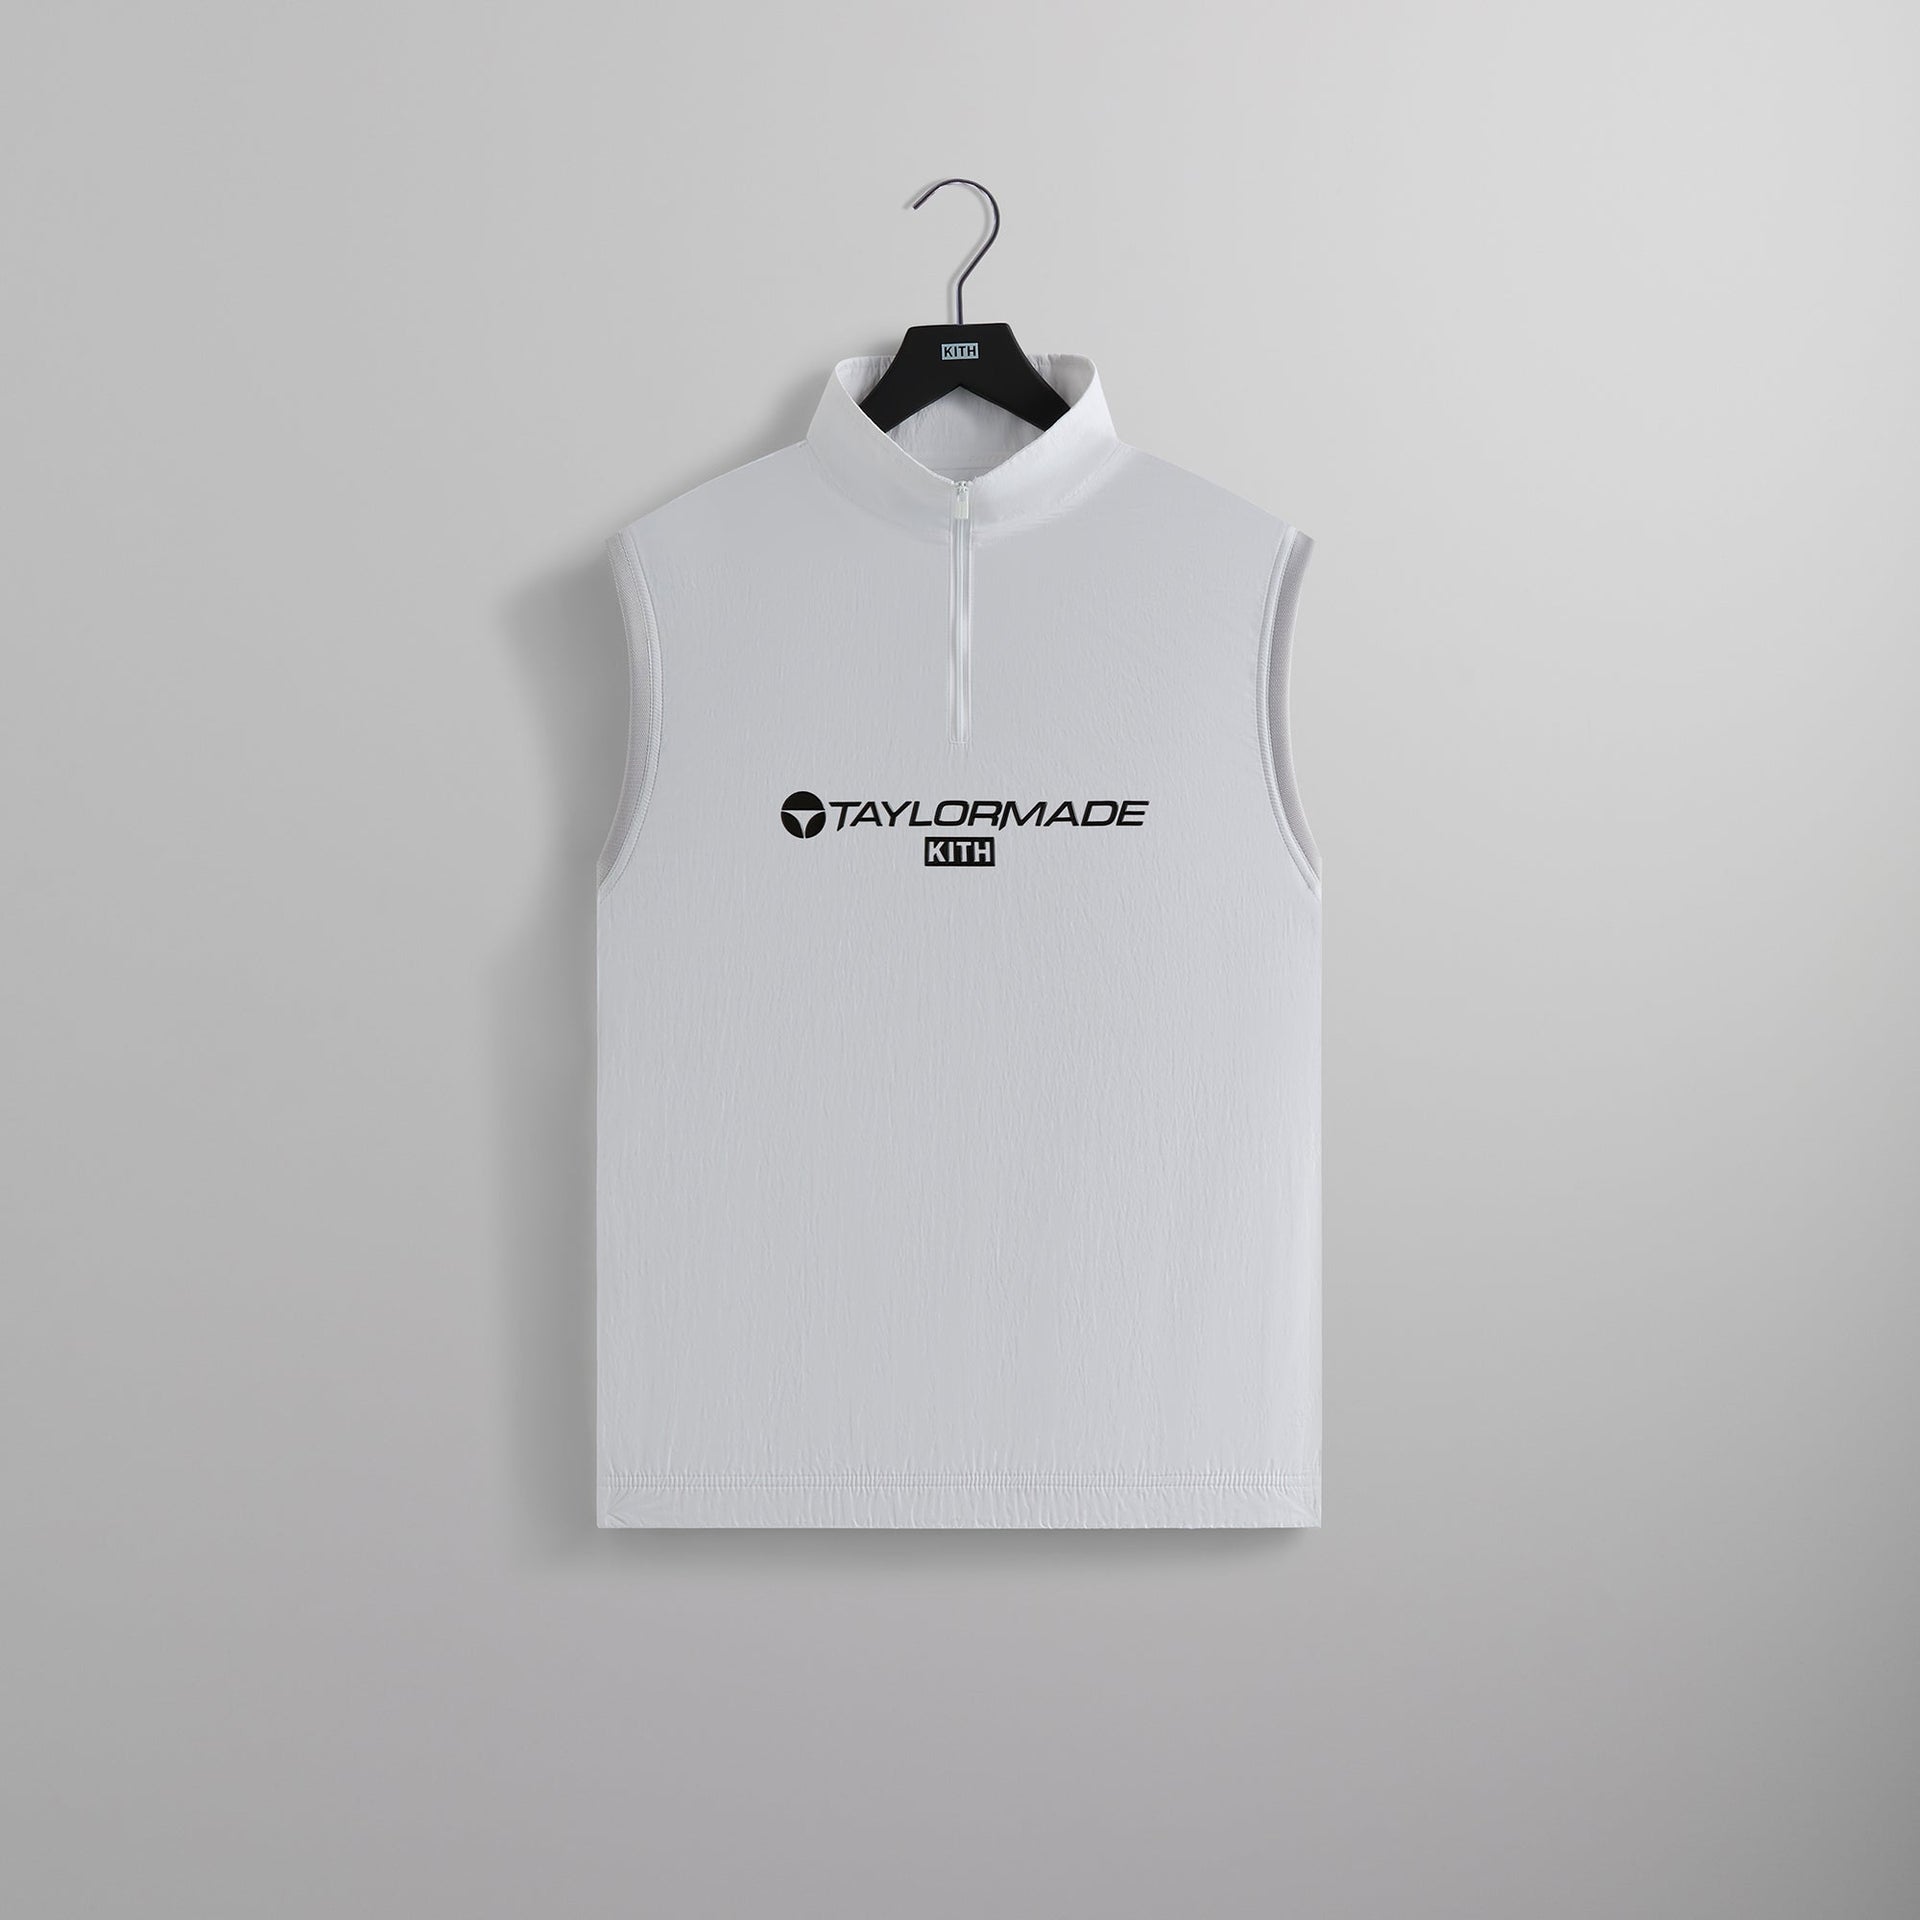 Kith for TaylorMade Blade Vest - Blank